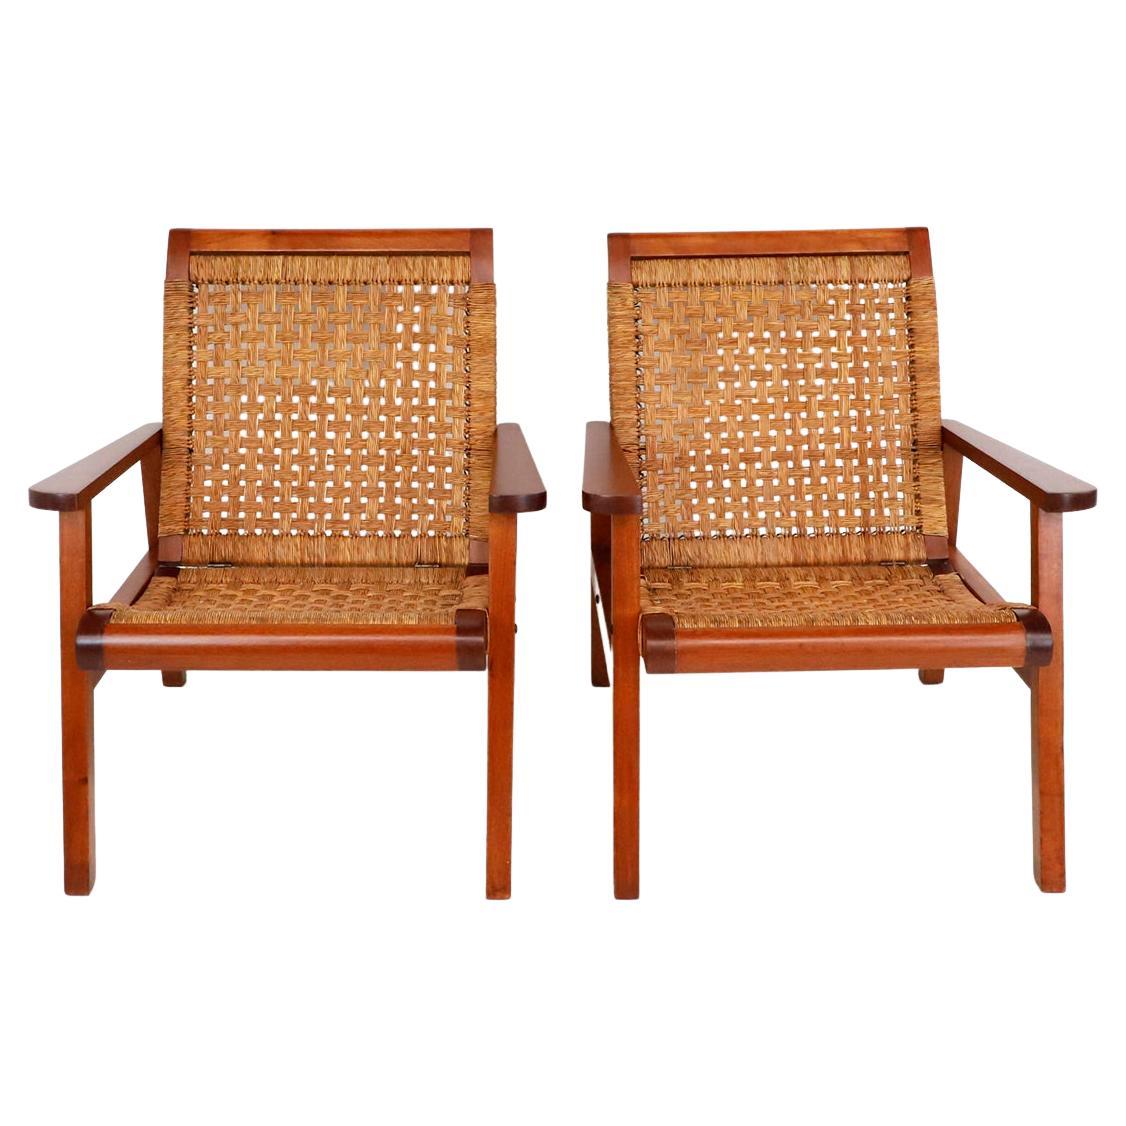 Pair of Mexican Mid-Century Modern Woven Lounge Chairs For Sale